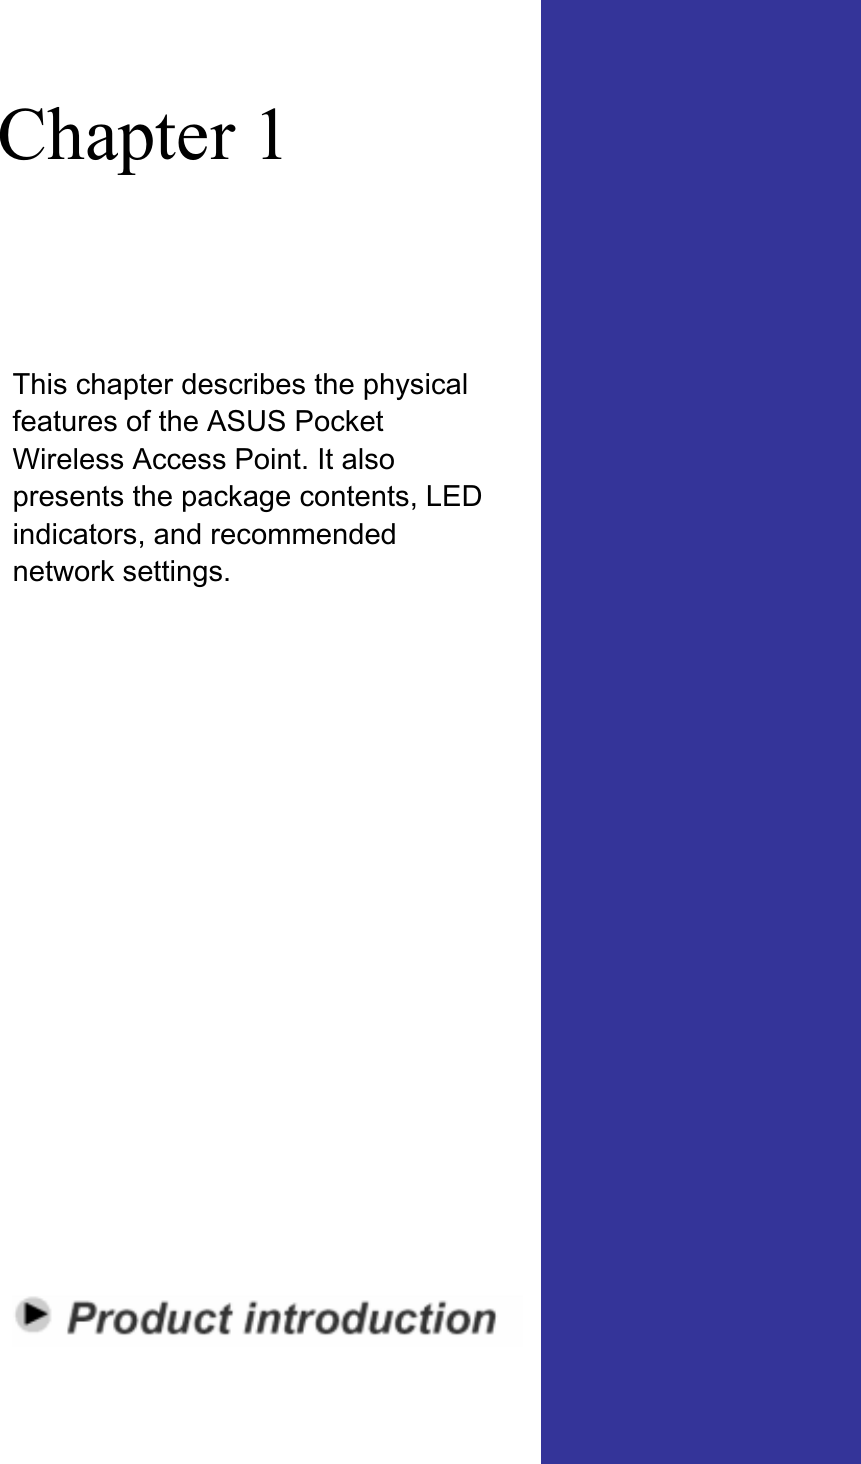 Chapter 1 This chapter describes the physical features of the ASUS Pocket Wireless Access Point. It also presents the package contents, LED indicators, and recommended network settings. 